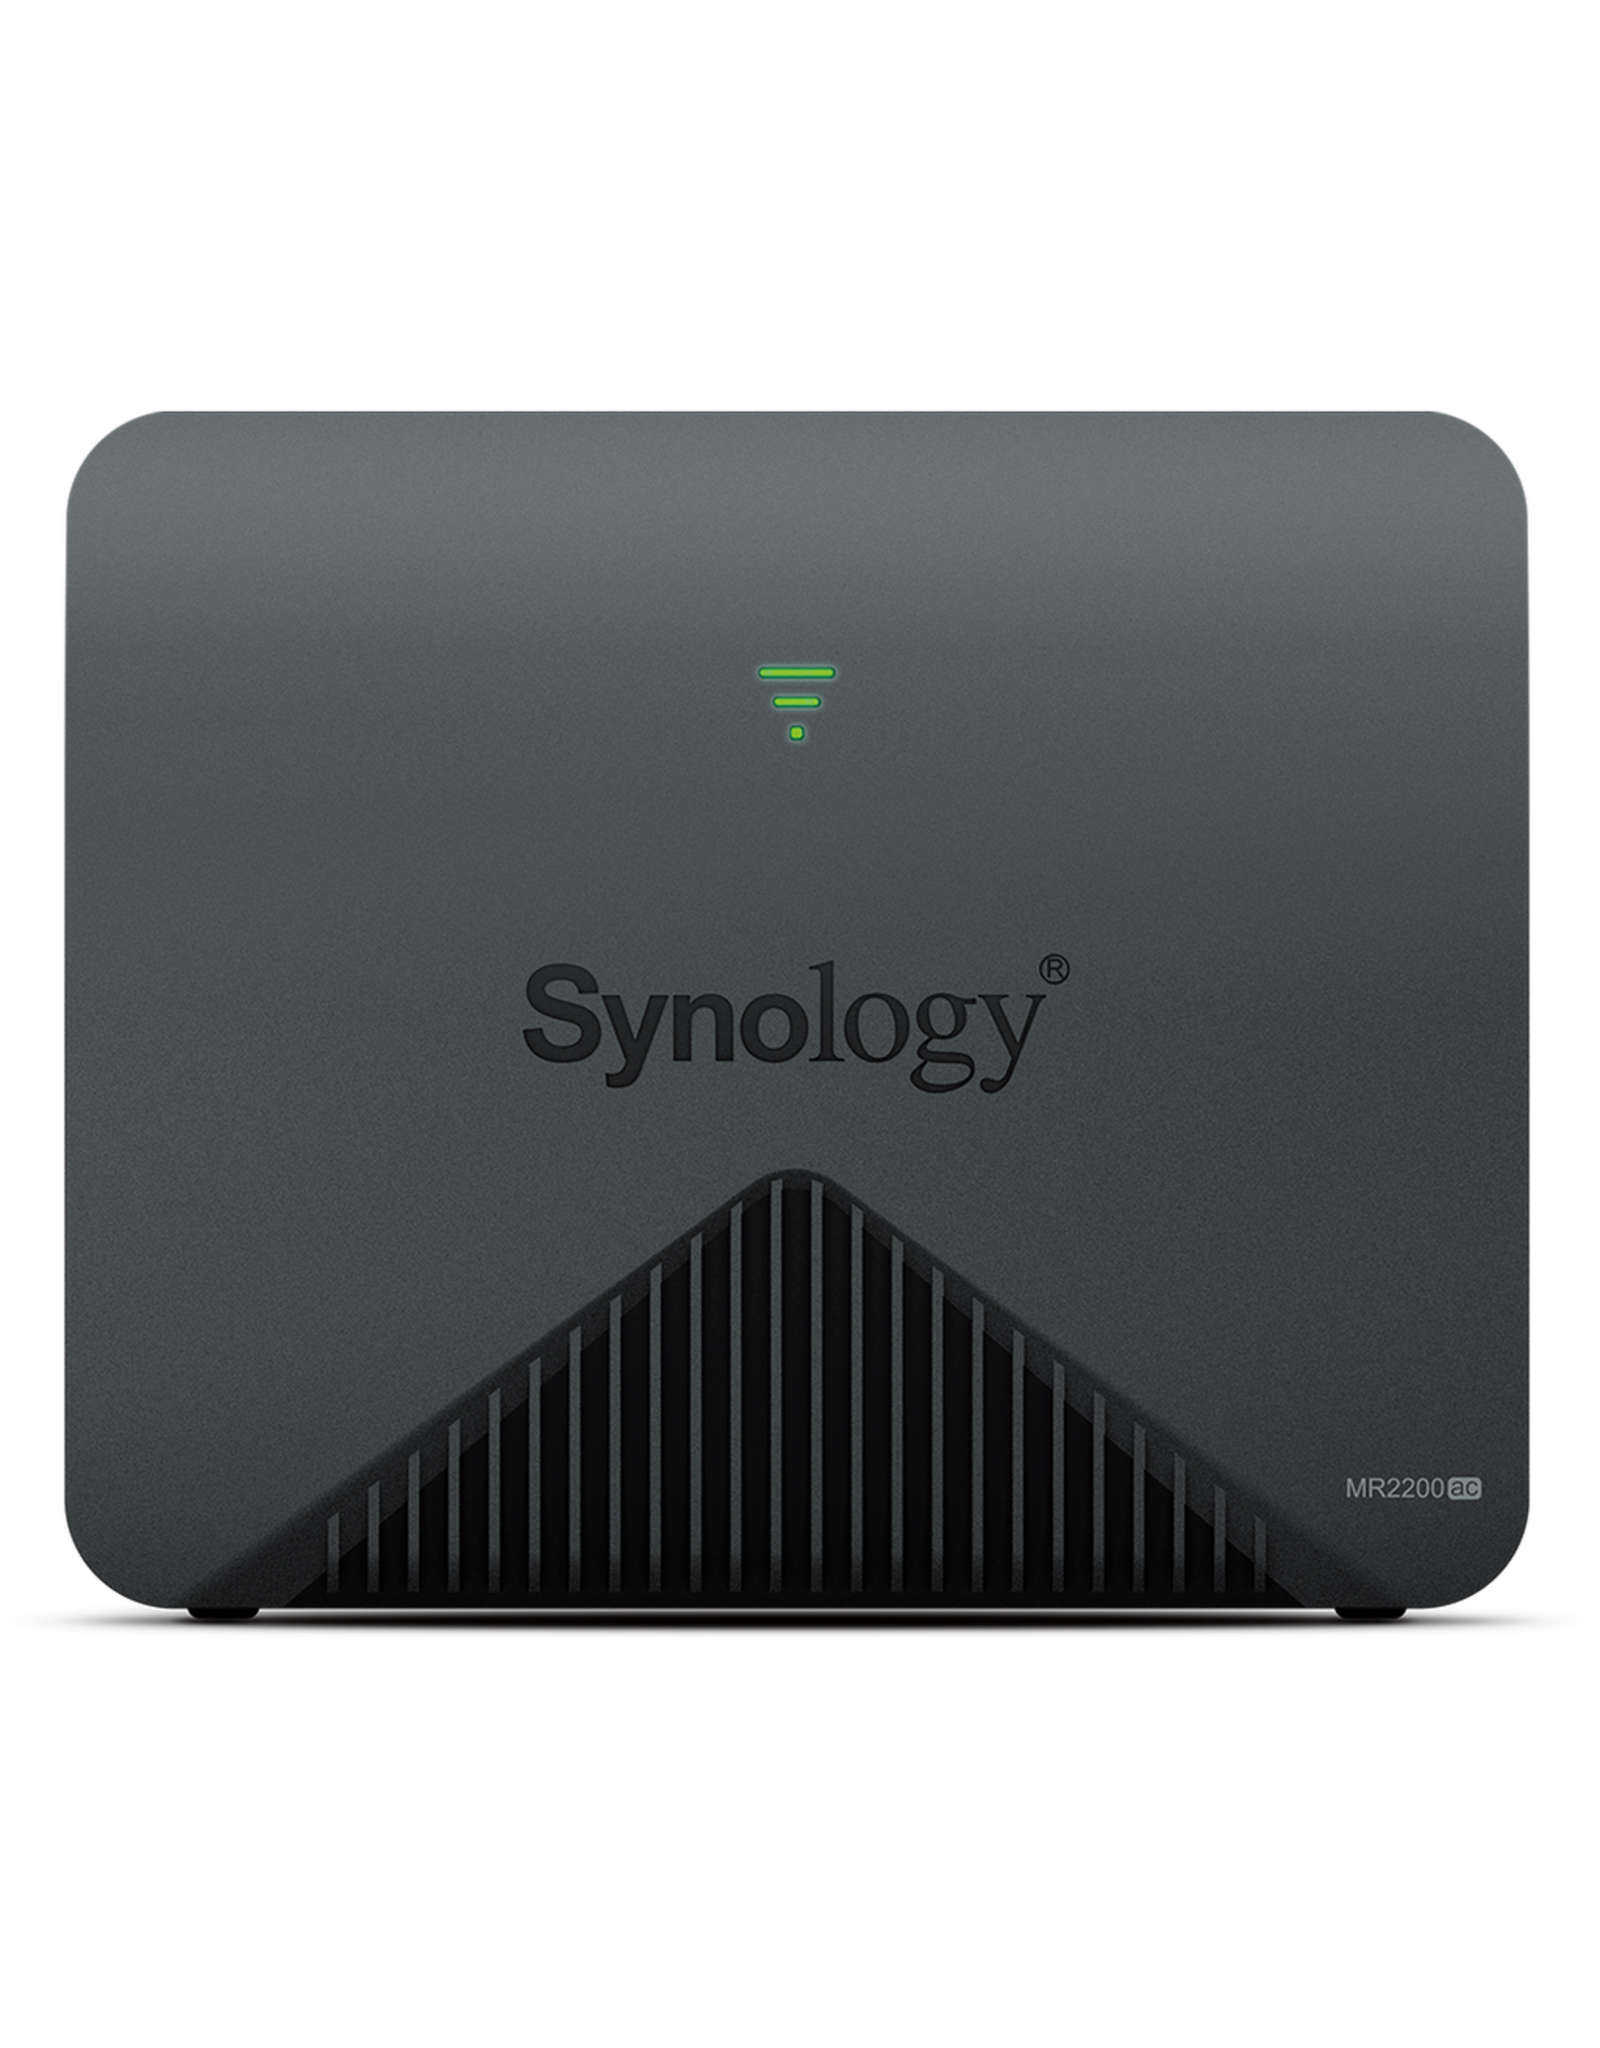 Synology Synology Wireless Mesh Router MR2200ac -2 x 2 MIMO 2.4GHz / 5GHz high-speed wireless router with 1 gigabit ethernet ports, WPS, USB3.0